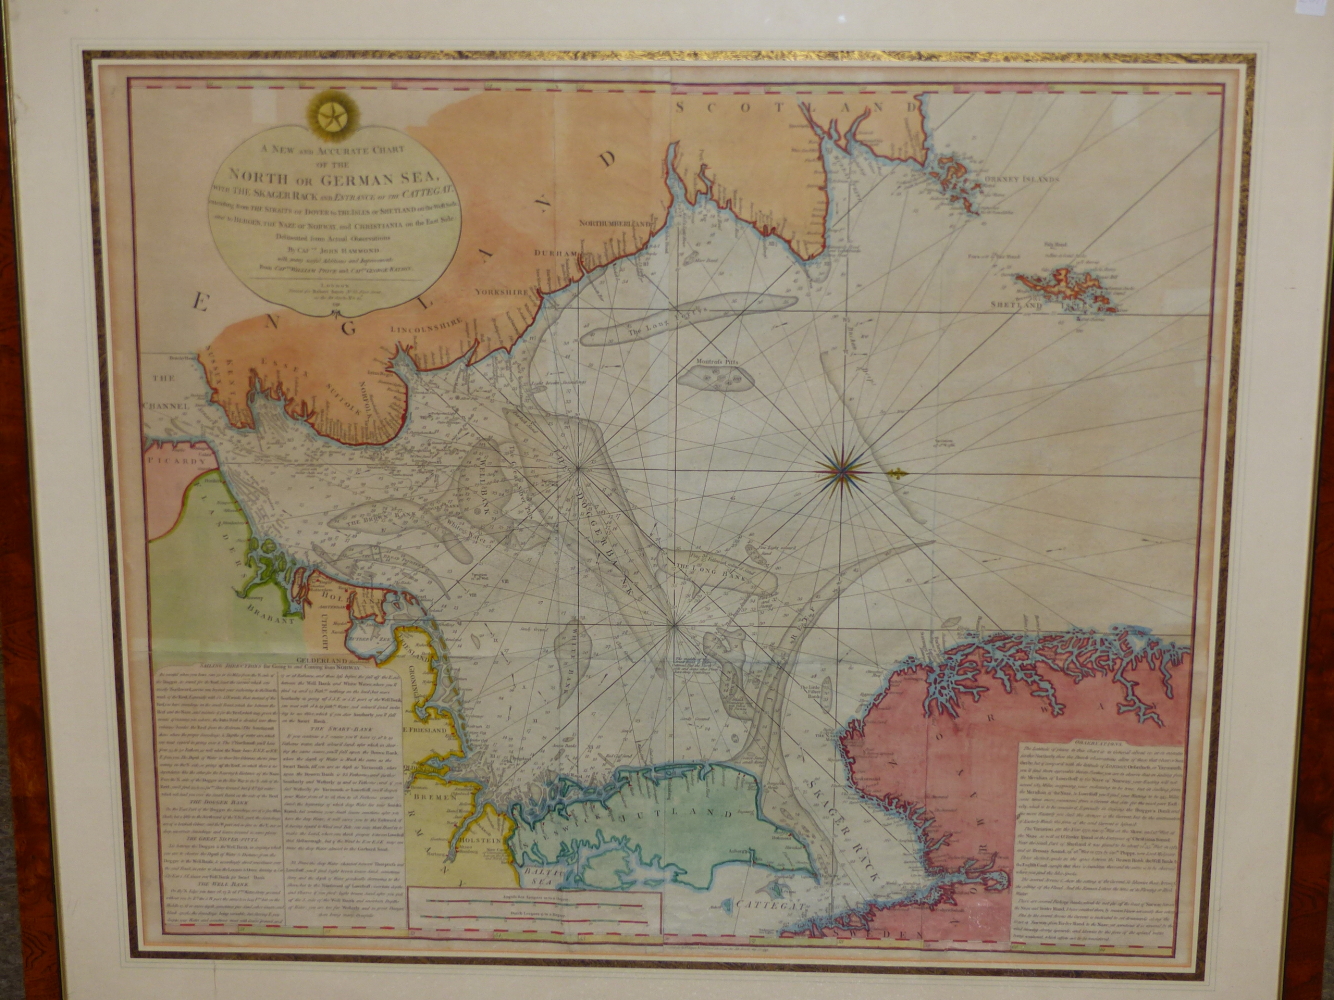 LATE 18th.C. HAND COLOURED MARINE MAP/CHART OF THE NORTH OR GERMAN SEA. 74 x 88cms.